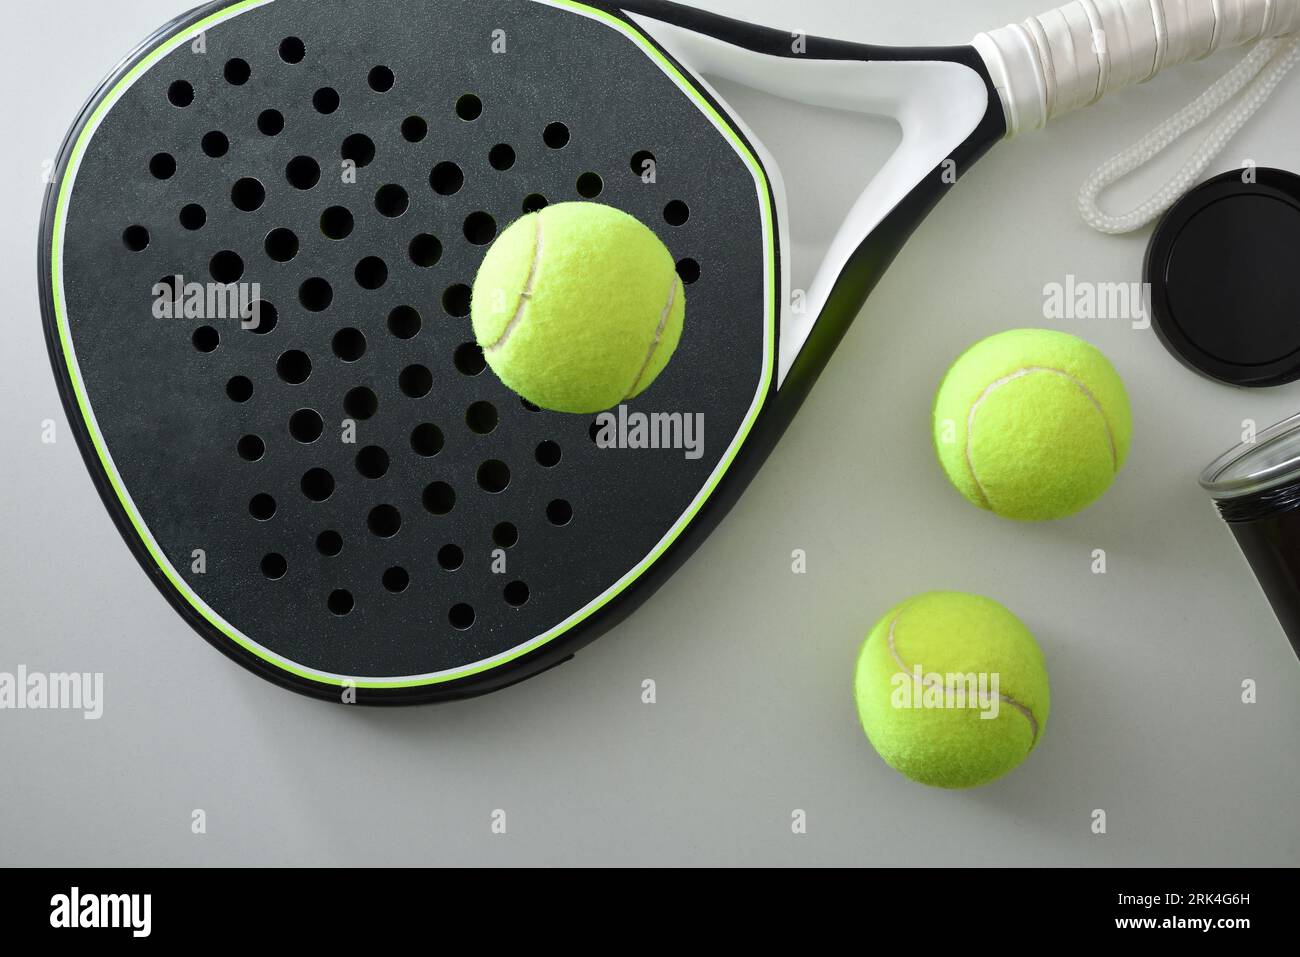 Black and white paddle tennis racket and ball pot on a white table. Top view. Stock Photo